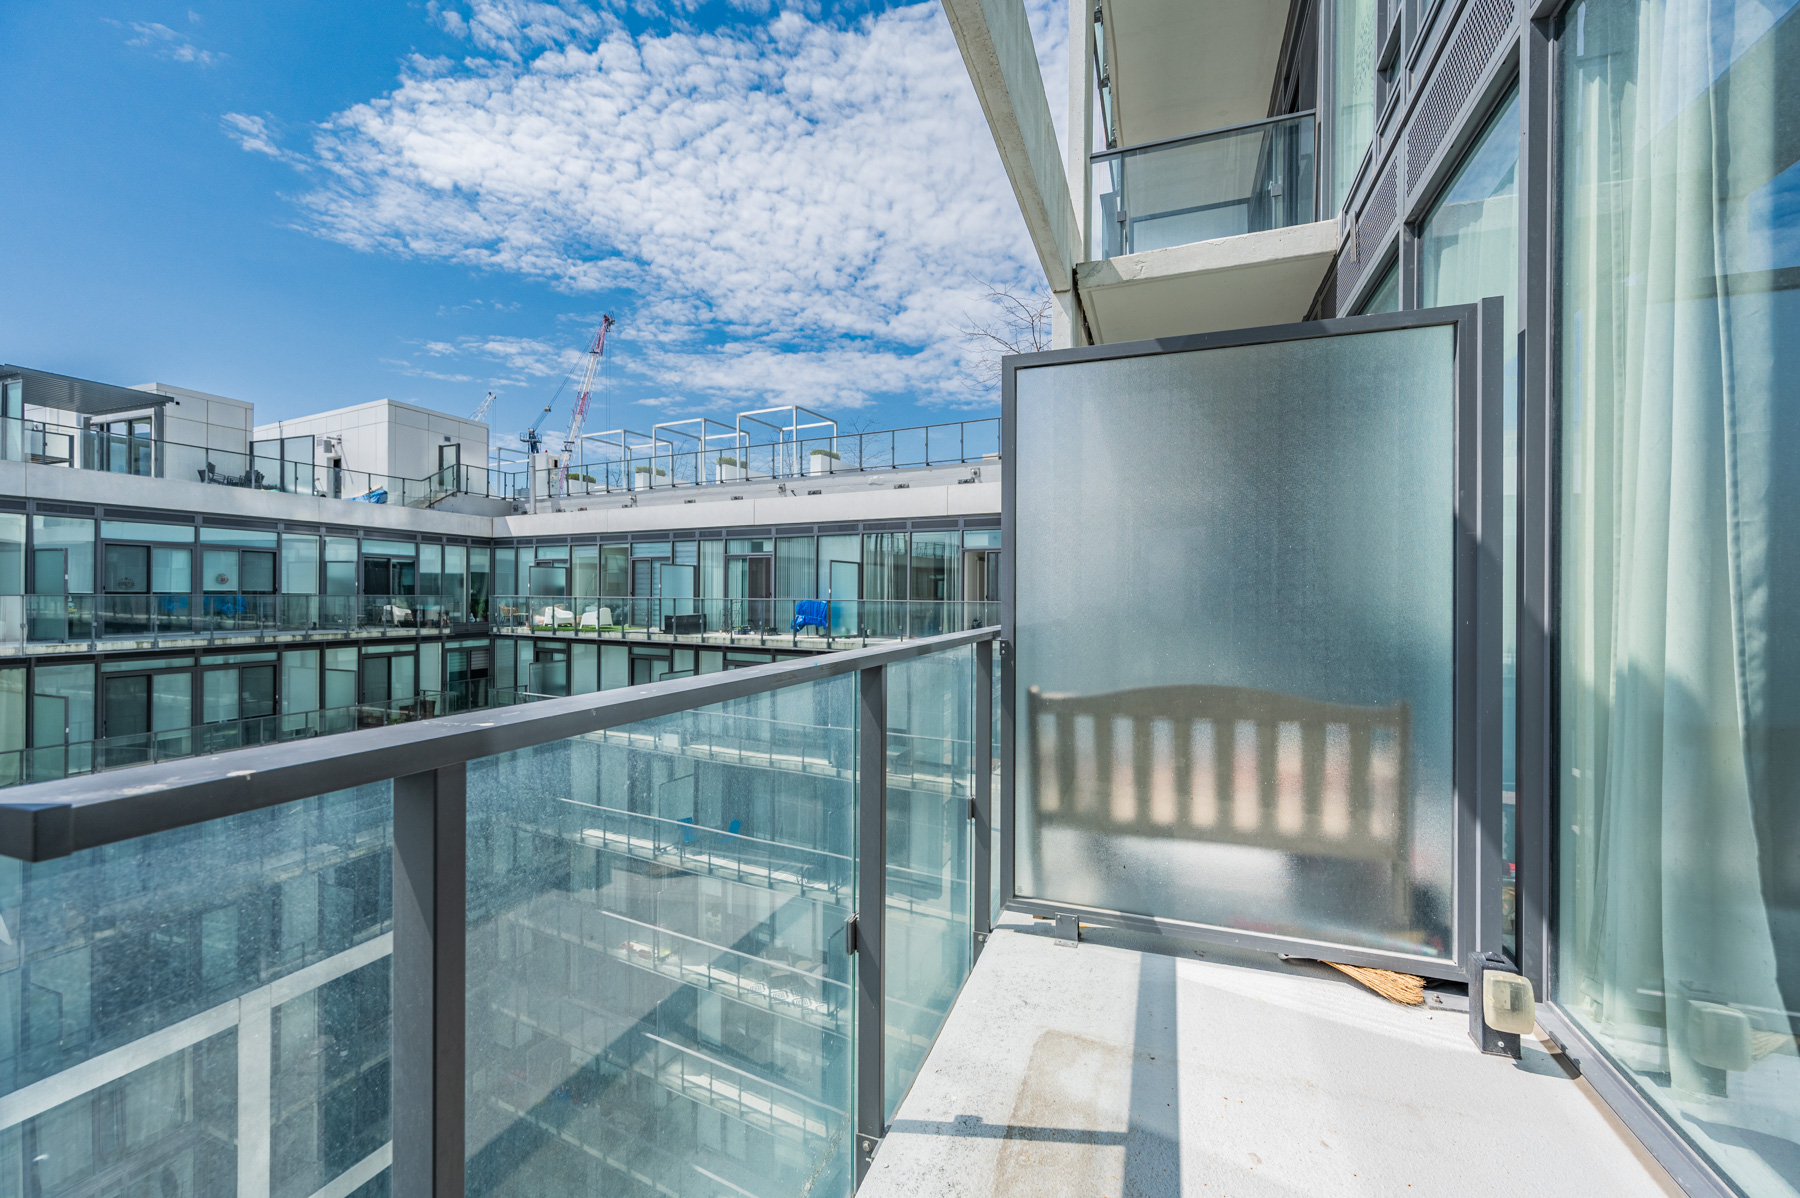 Condo balcony with glazed divider and clear glass panels.